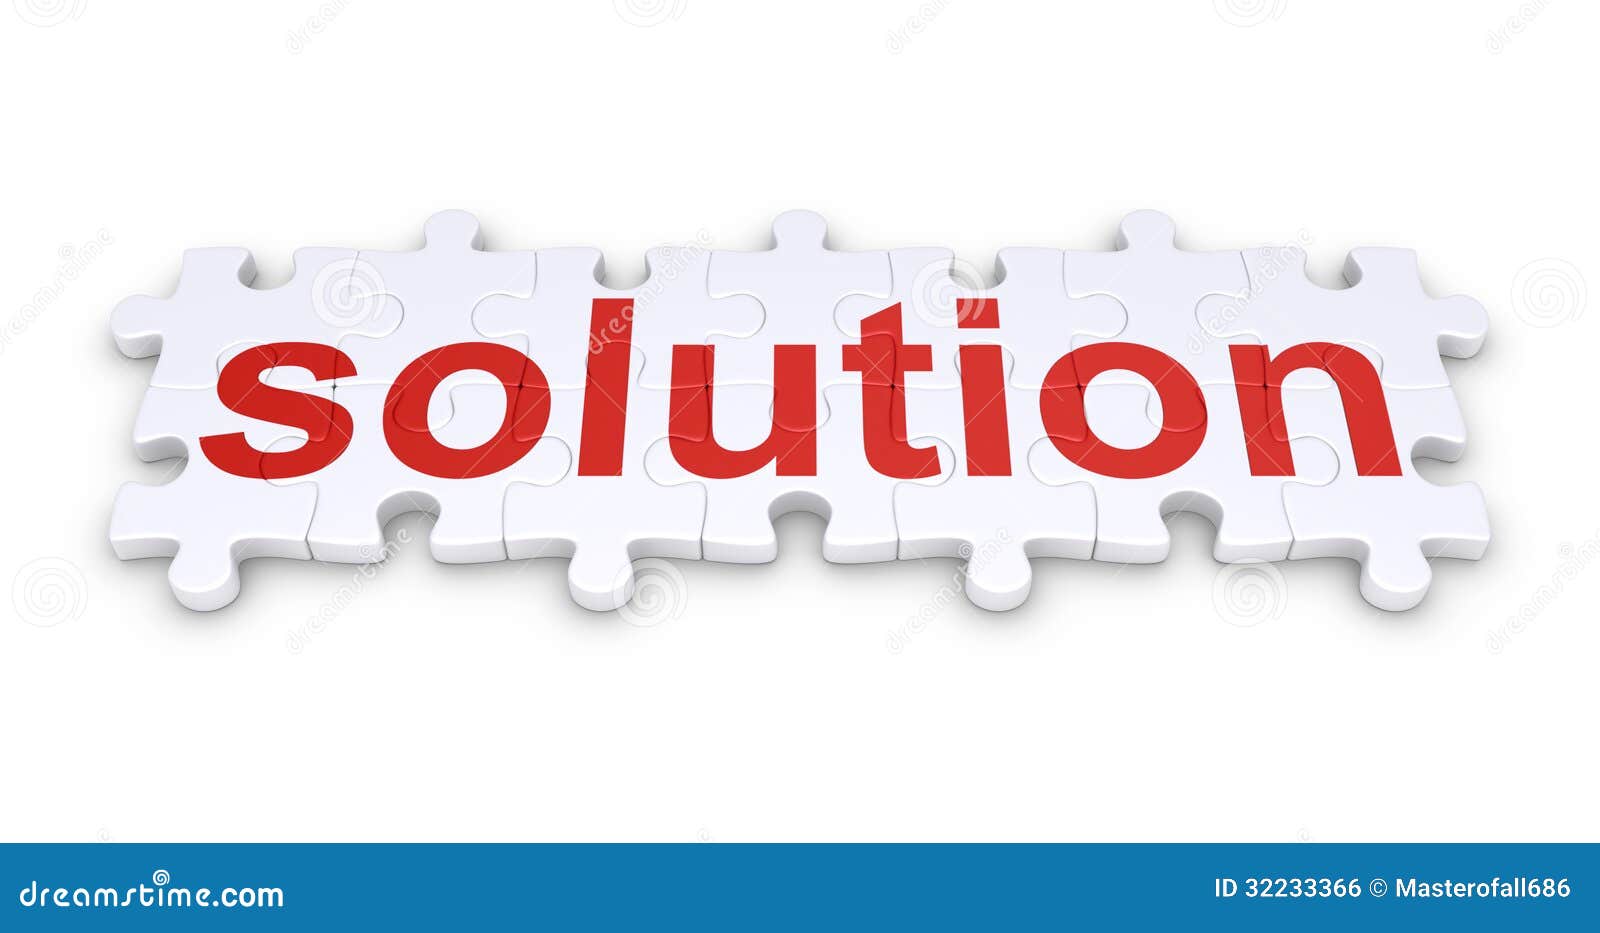 solution word made of puzzle pieces